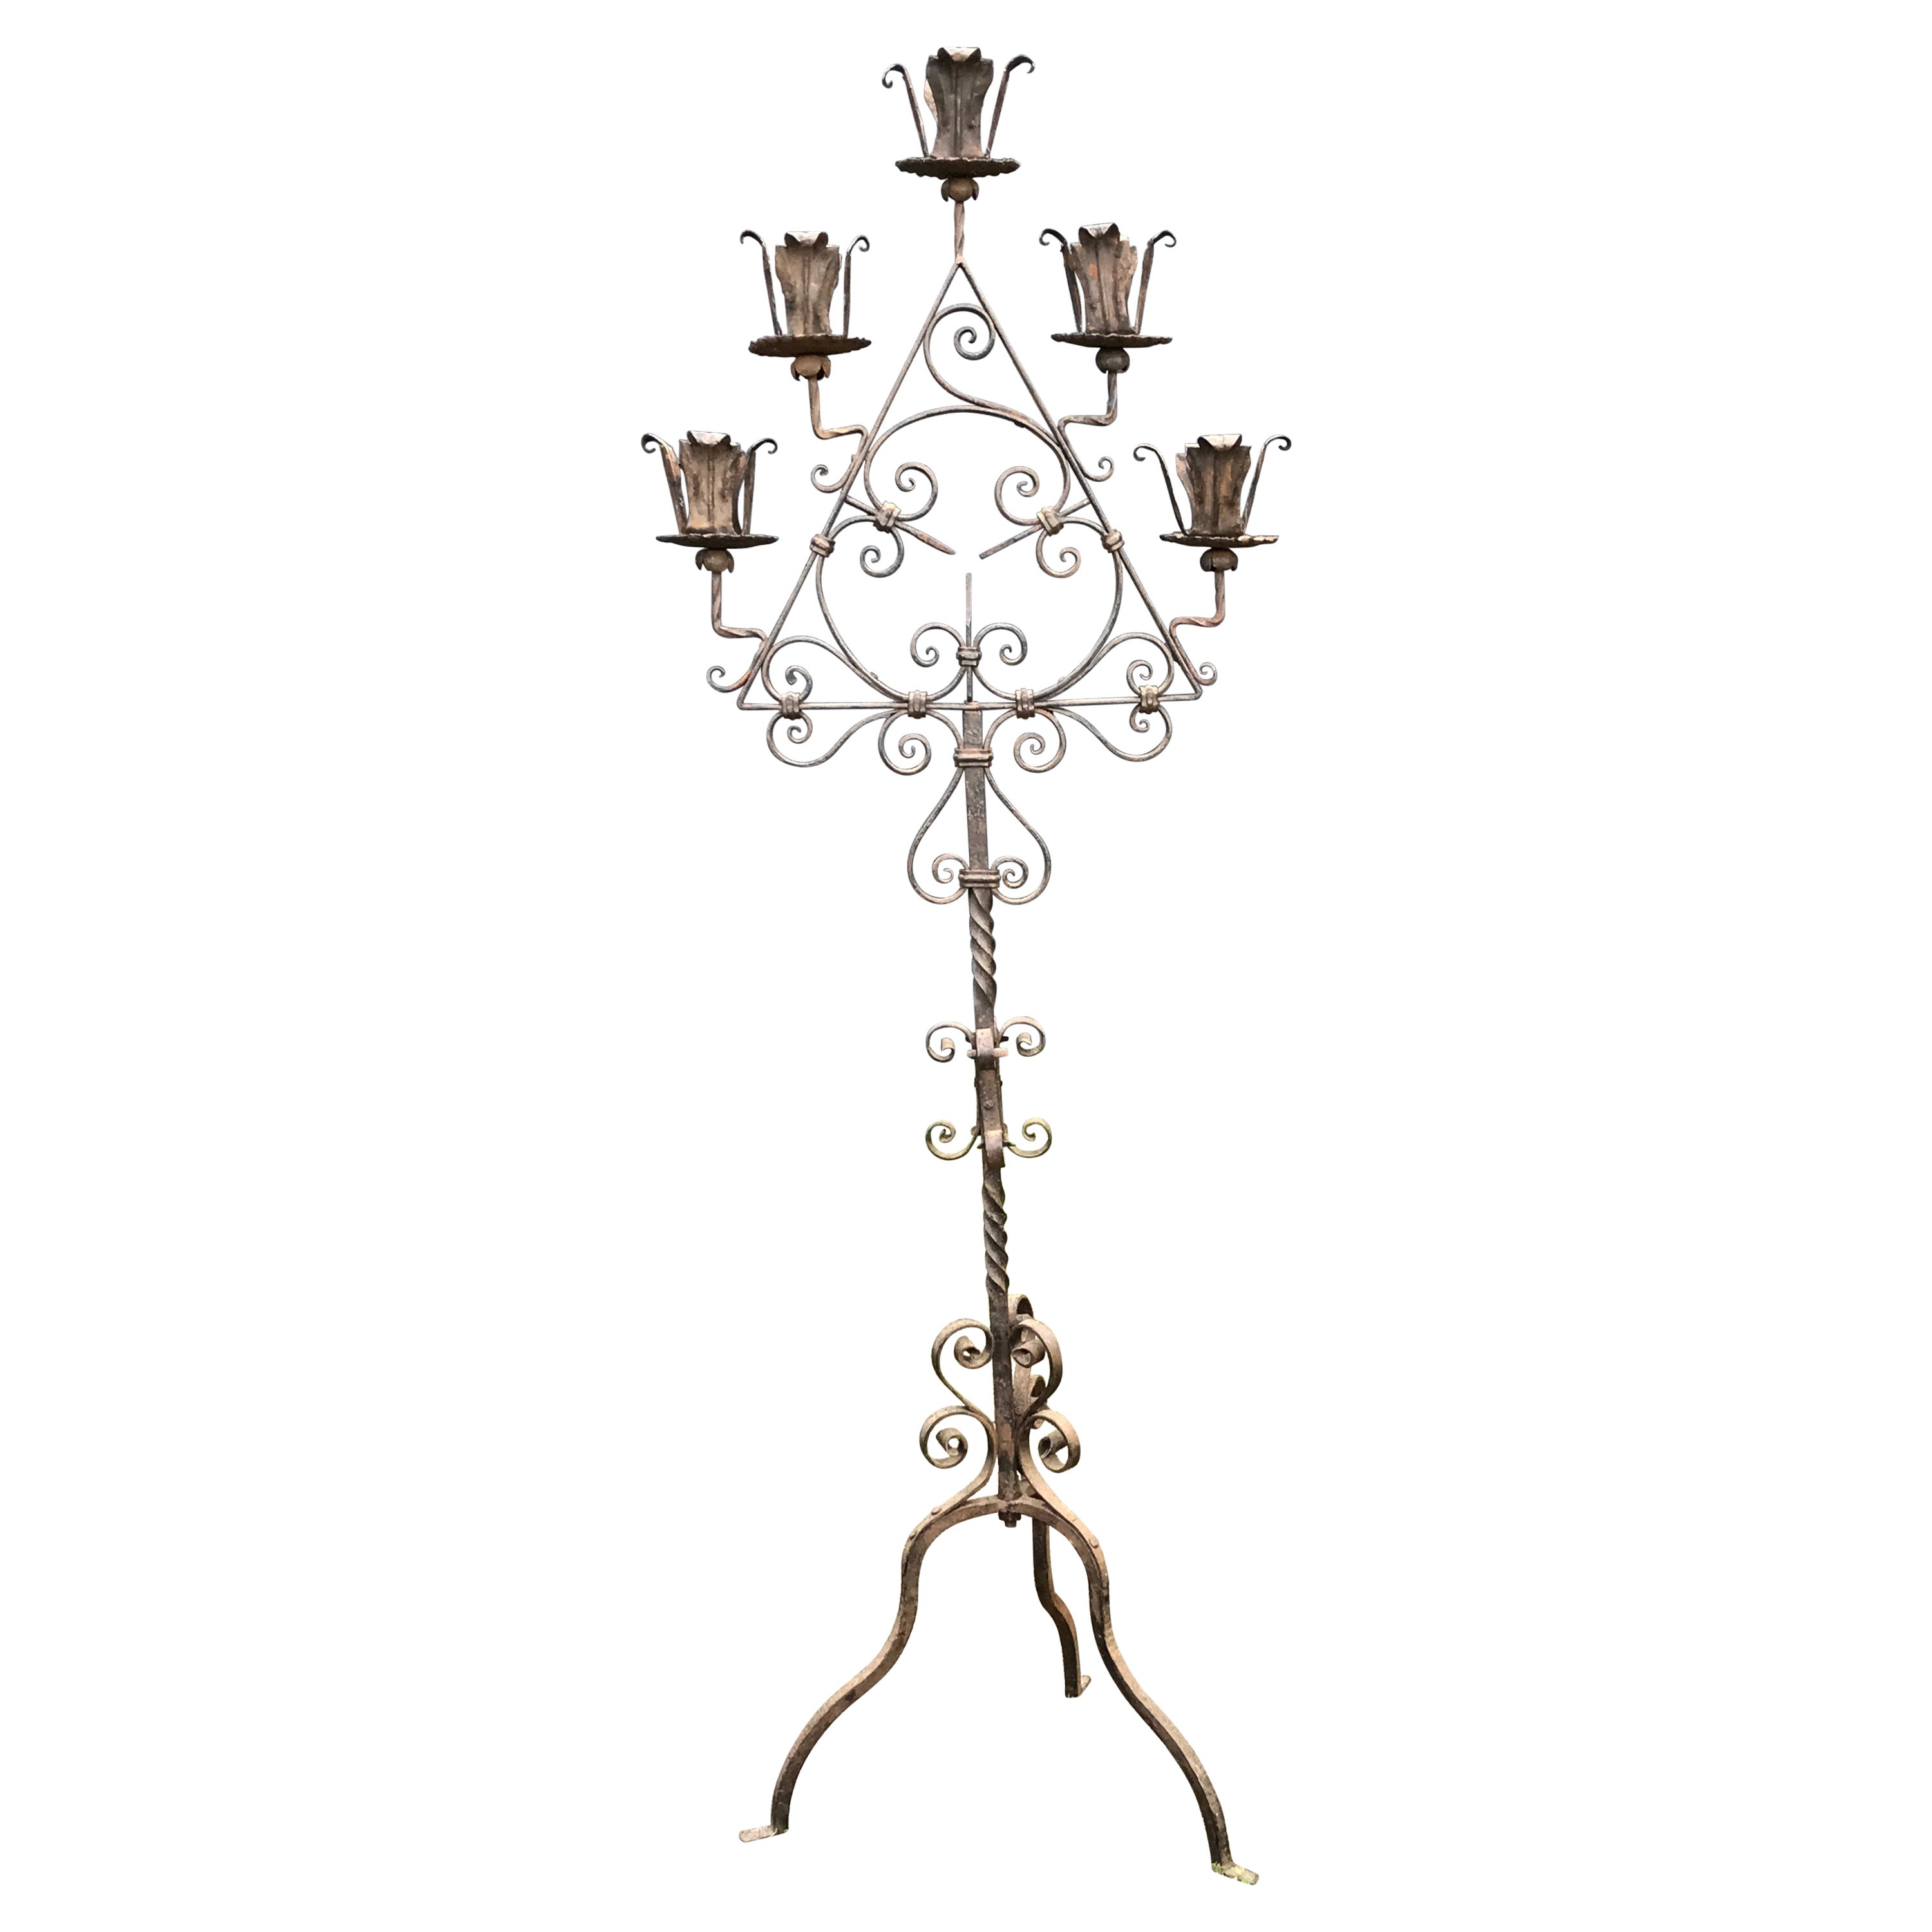 Torchere Italian Iron 5 bougeoirs ou torches monumentales en vente